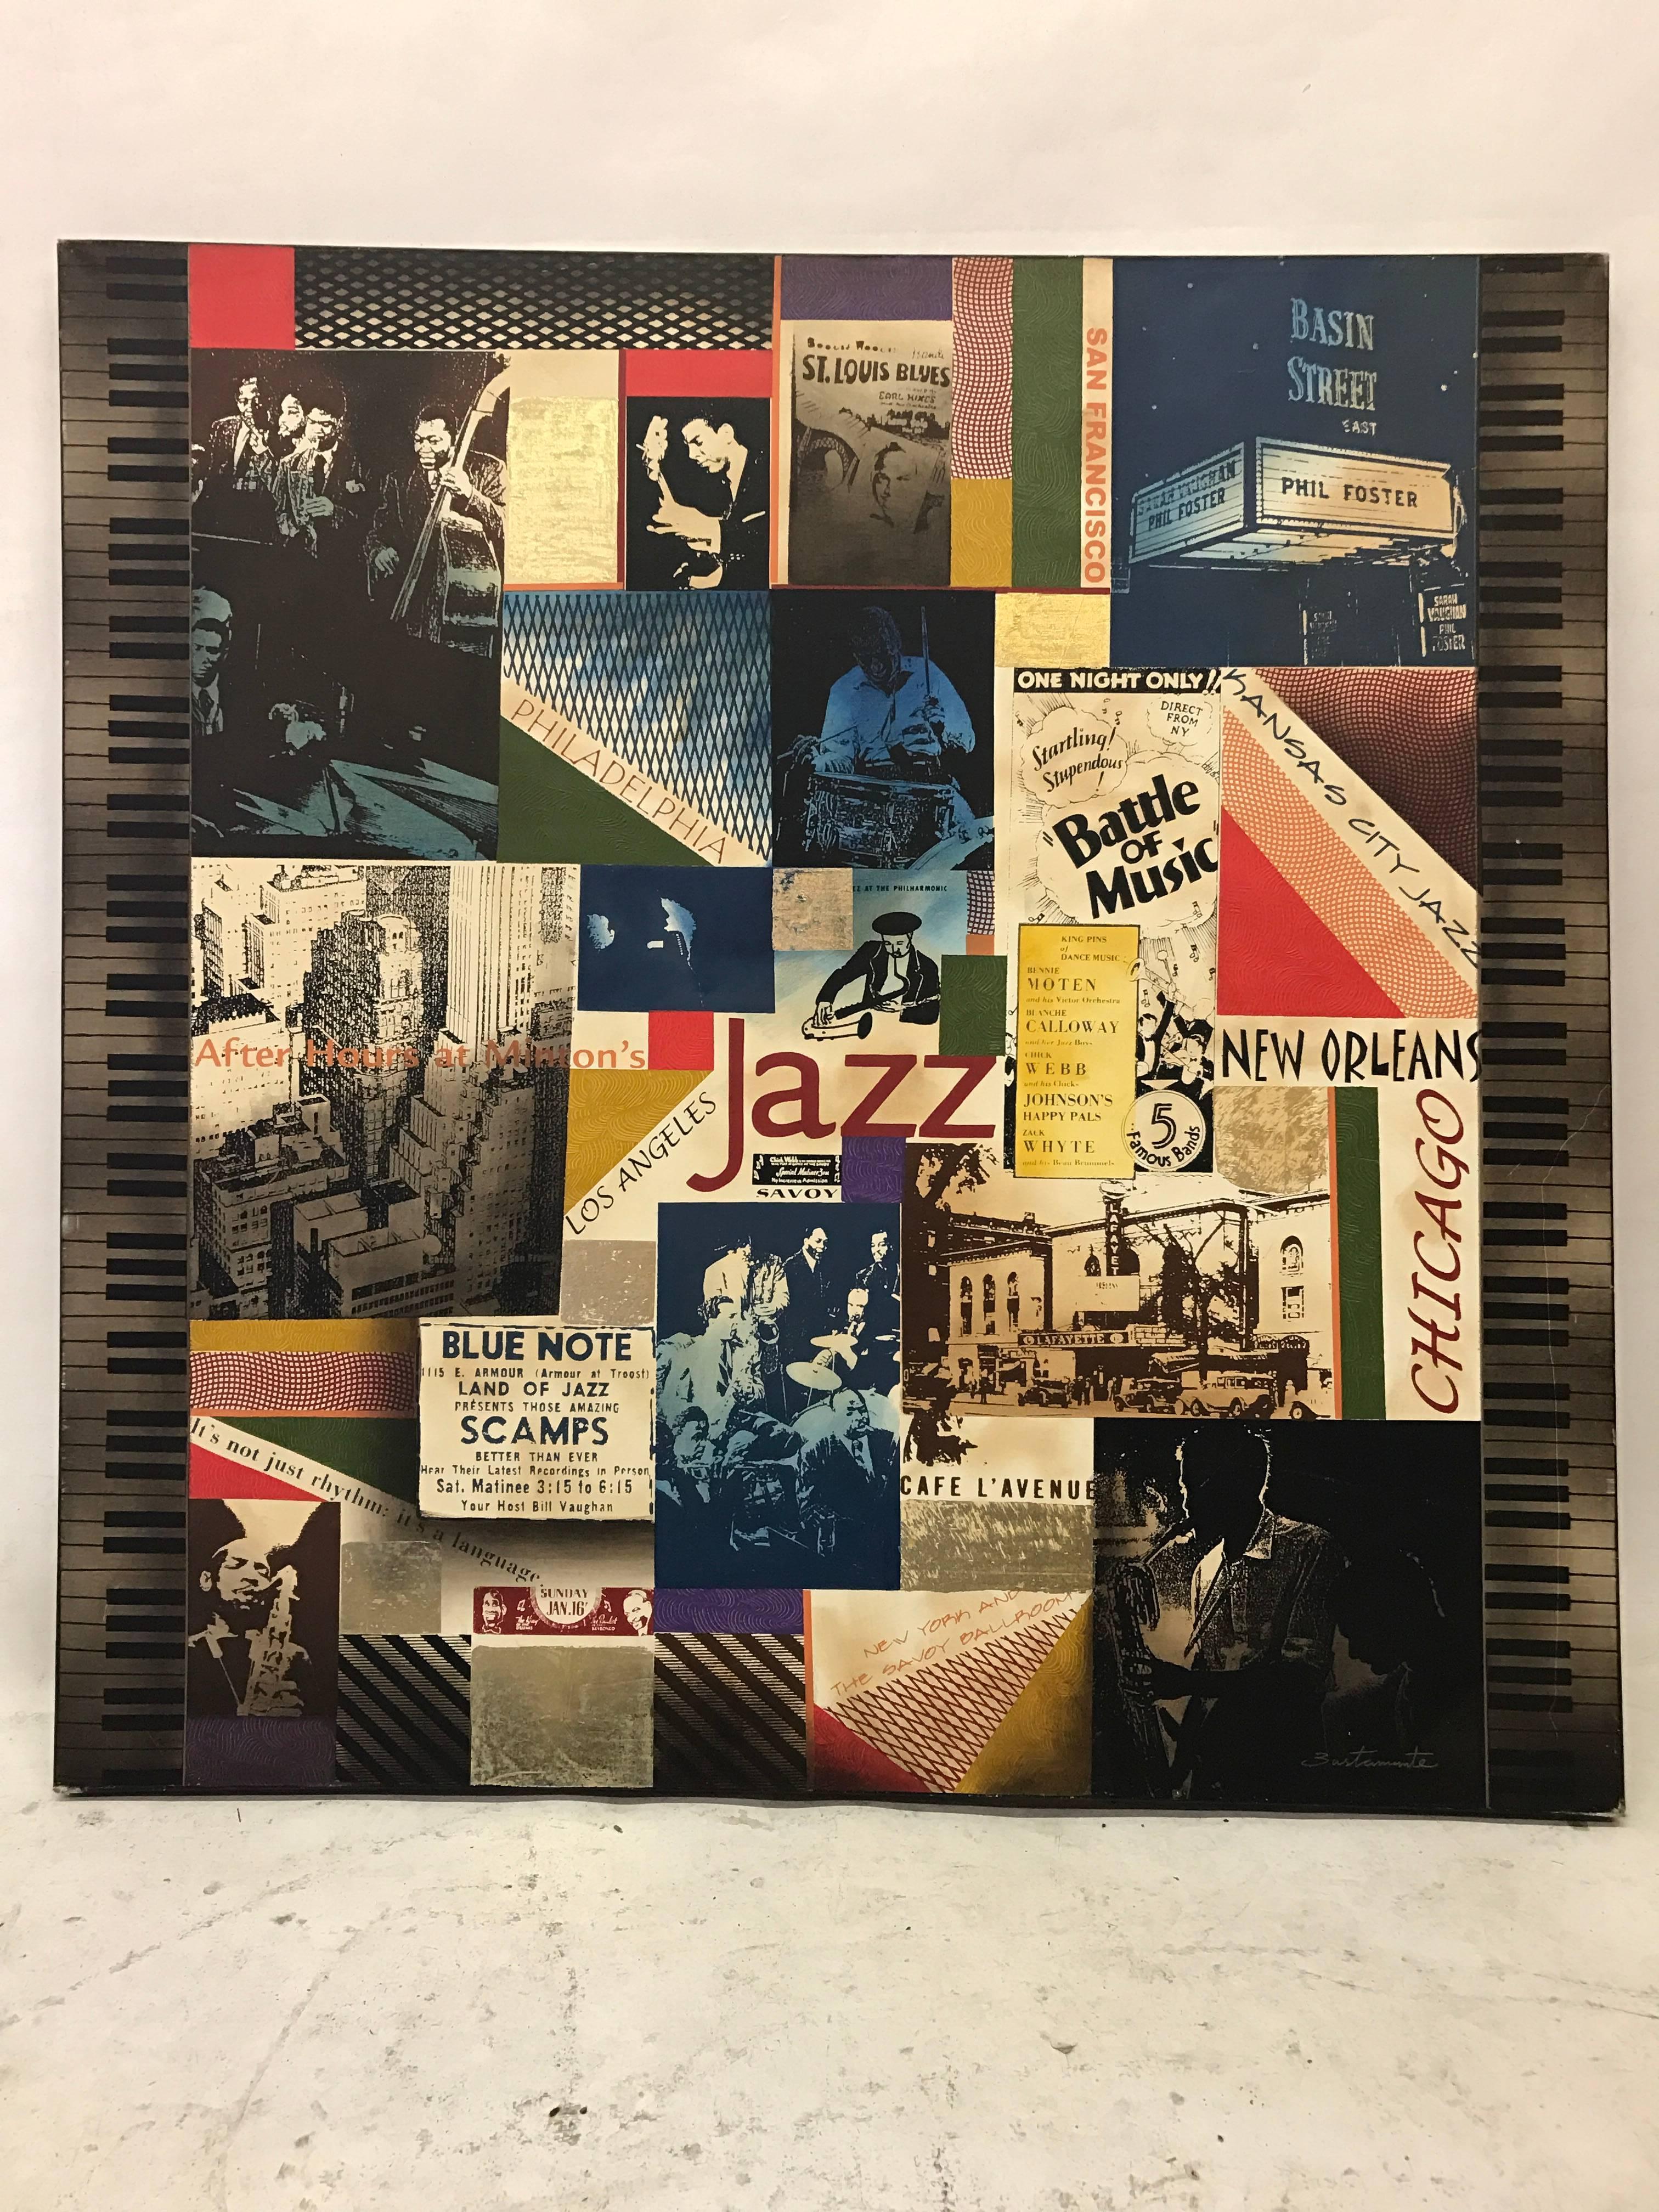 High quality print on canvas of a collage signed Bustamante. This multicolored piece captures the energy of the jazz scene and features names of cities that had prominent jazz clubs, as well as photos of saxophone players.
 